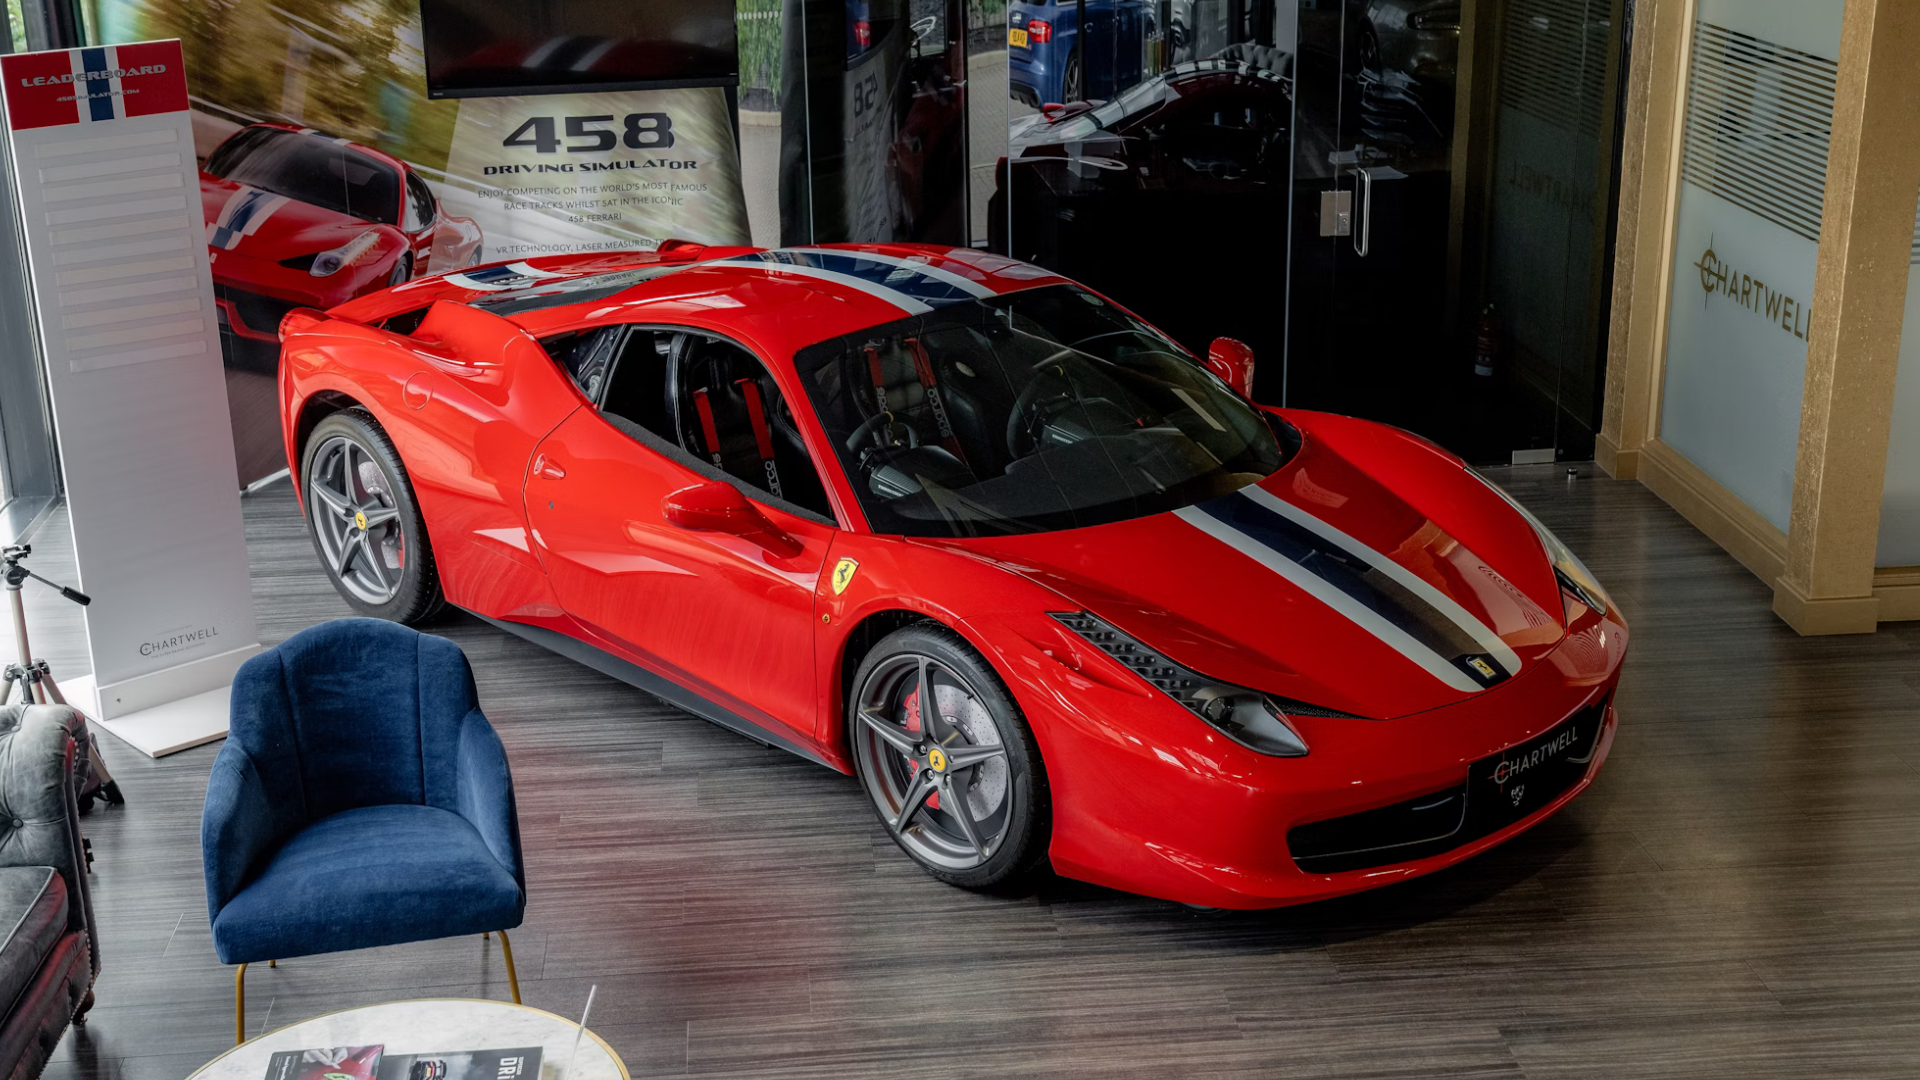 The amazing racing simulator is encased in an authentic Ferrari 458 shell and could soon belong to you.